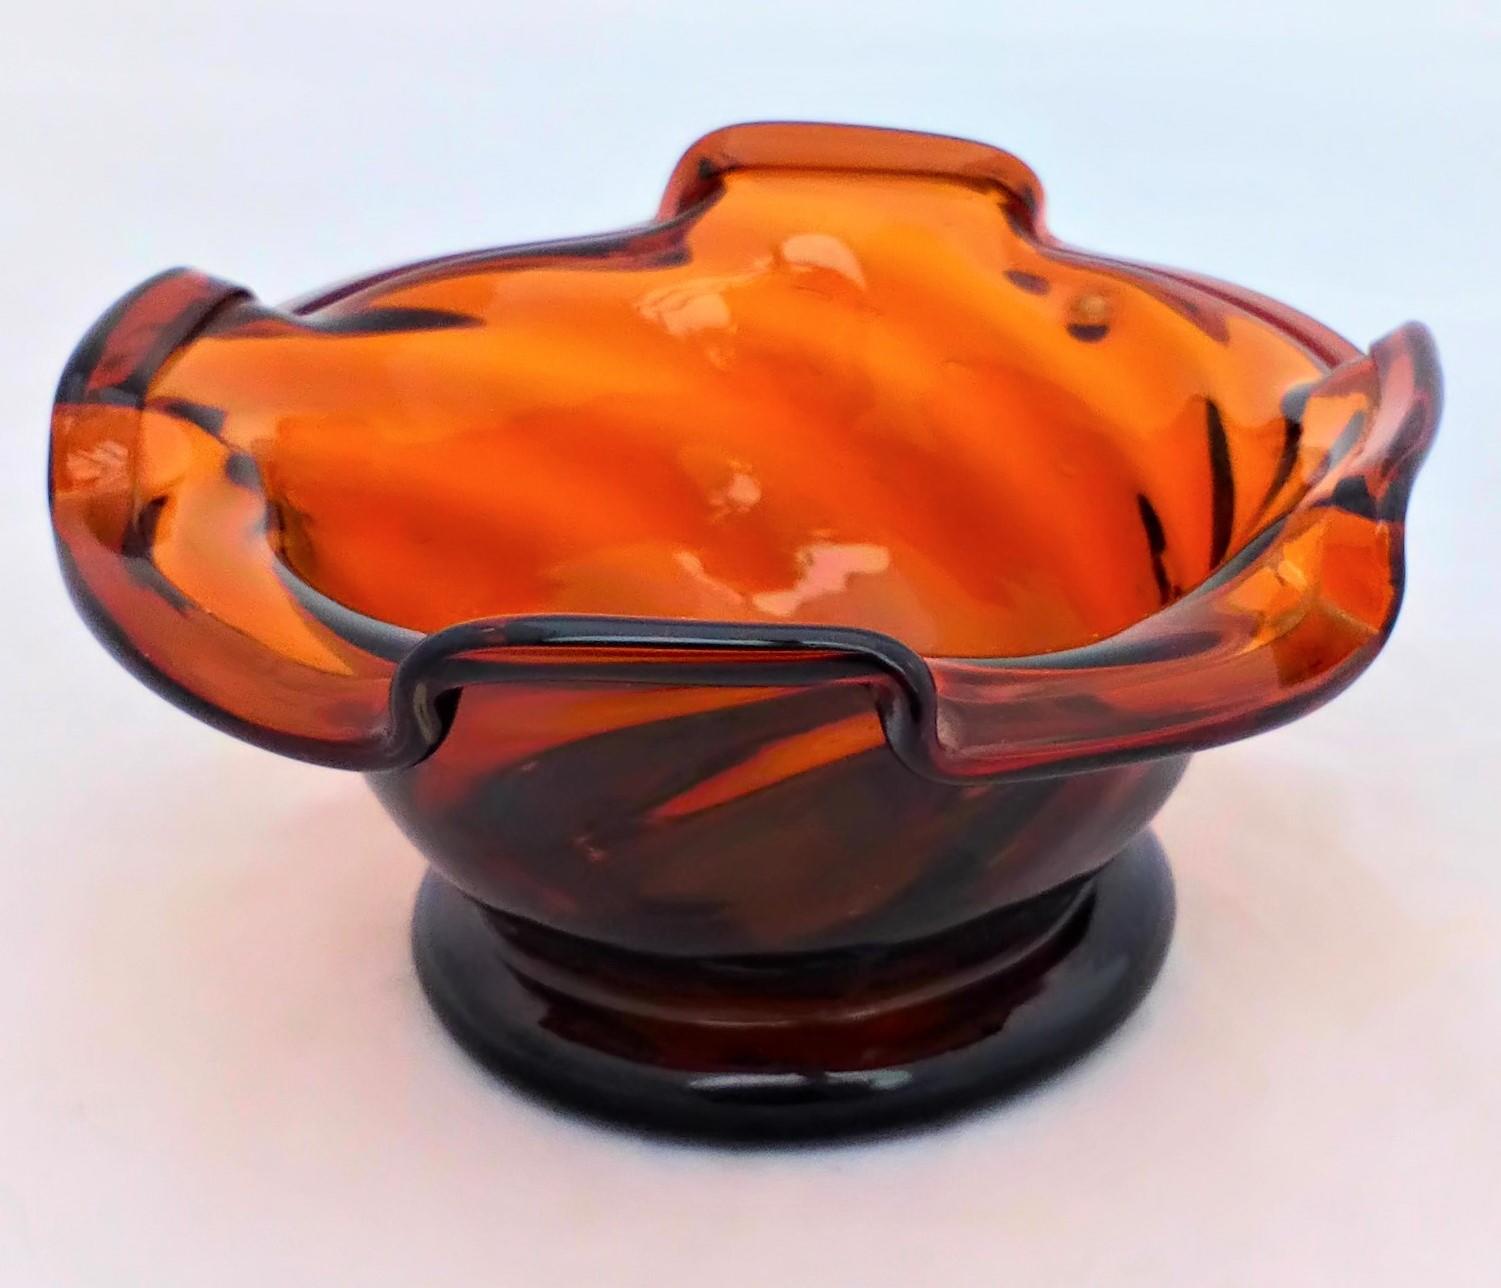 Antique Victorian amber glass wrythen sweetmeat bowl or pan with a pinched and folded rim circa 1850